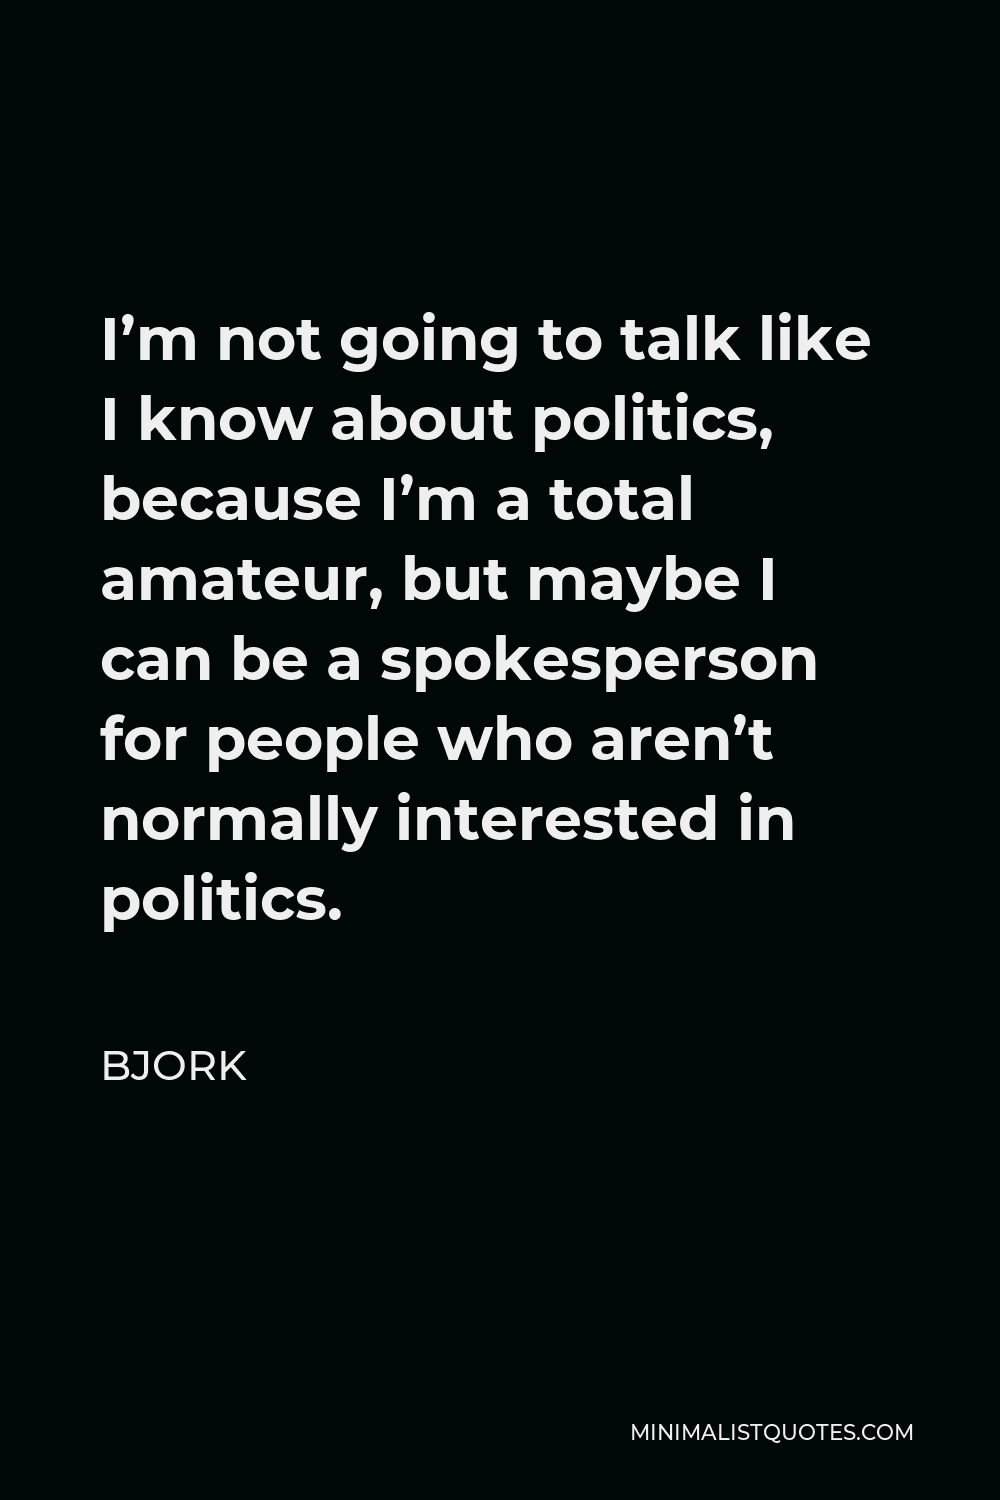 Bjork Quote - I’m not going to talk like I know about politics, because I’m a total amateur, but maybe I can be a spokesperson for people who aren’t normally interested in politics.